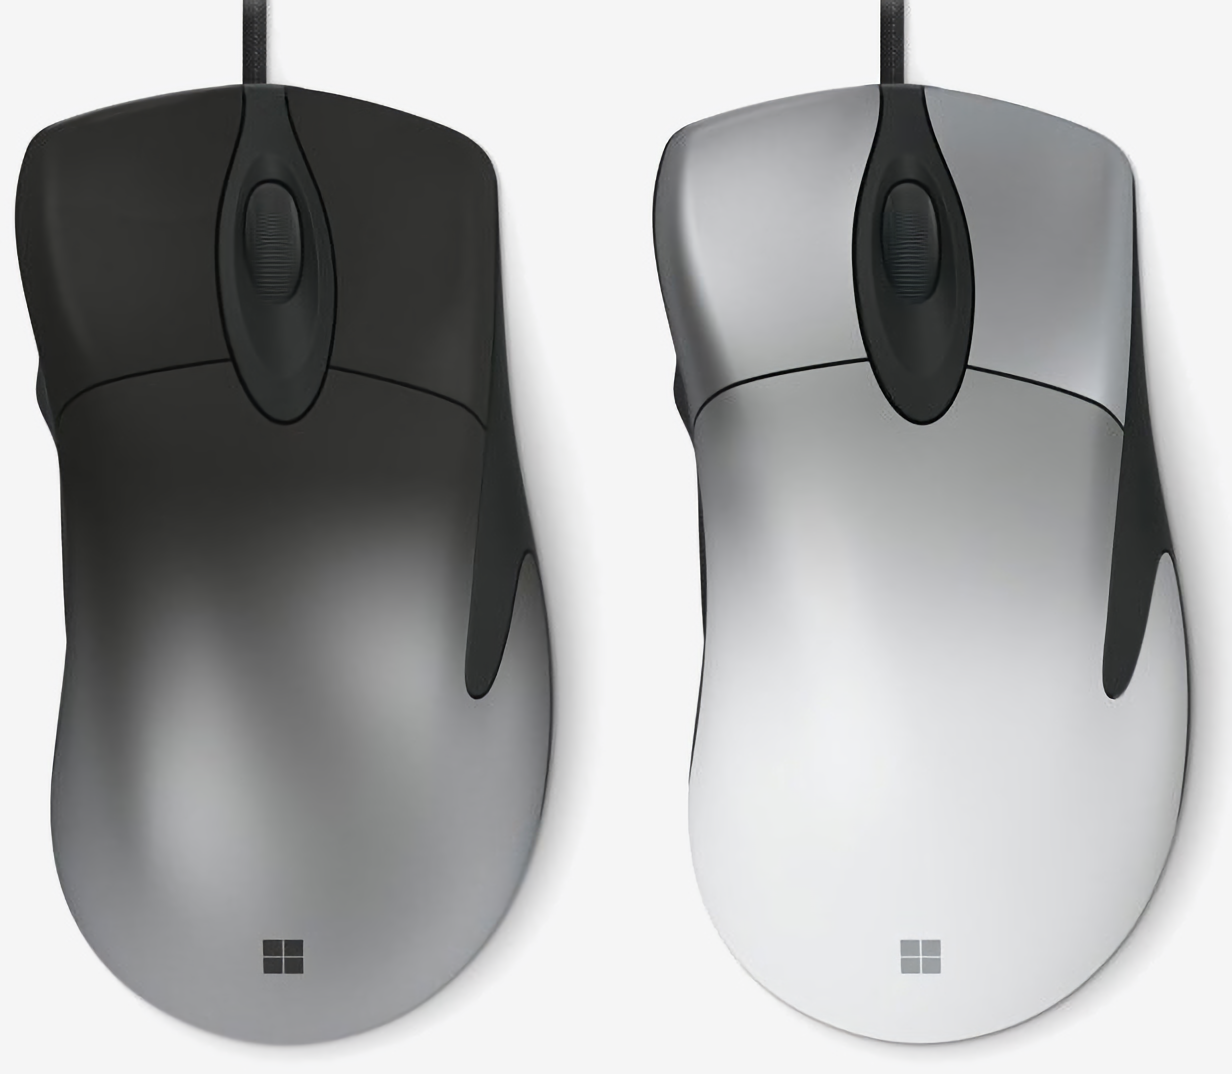 Microsoft's retro-inspired Pro IntelliMouse arrives in the US